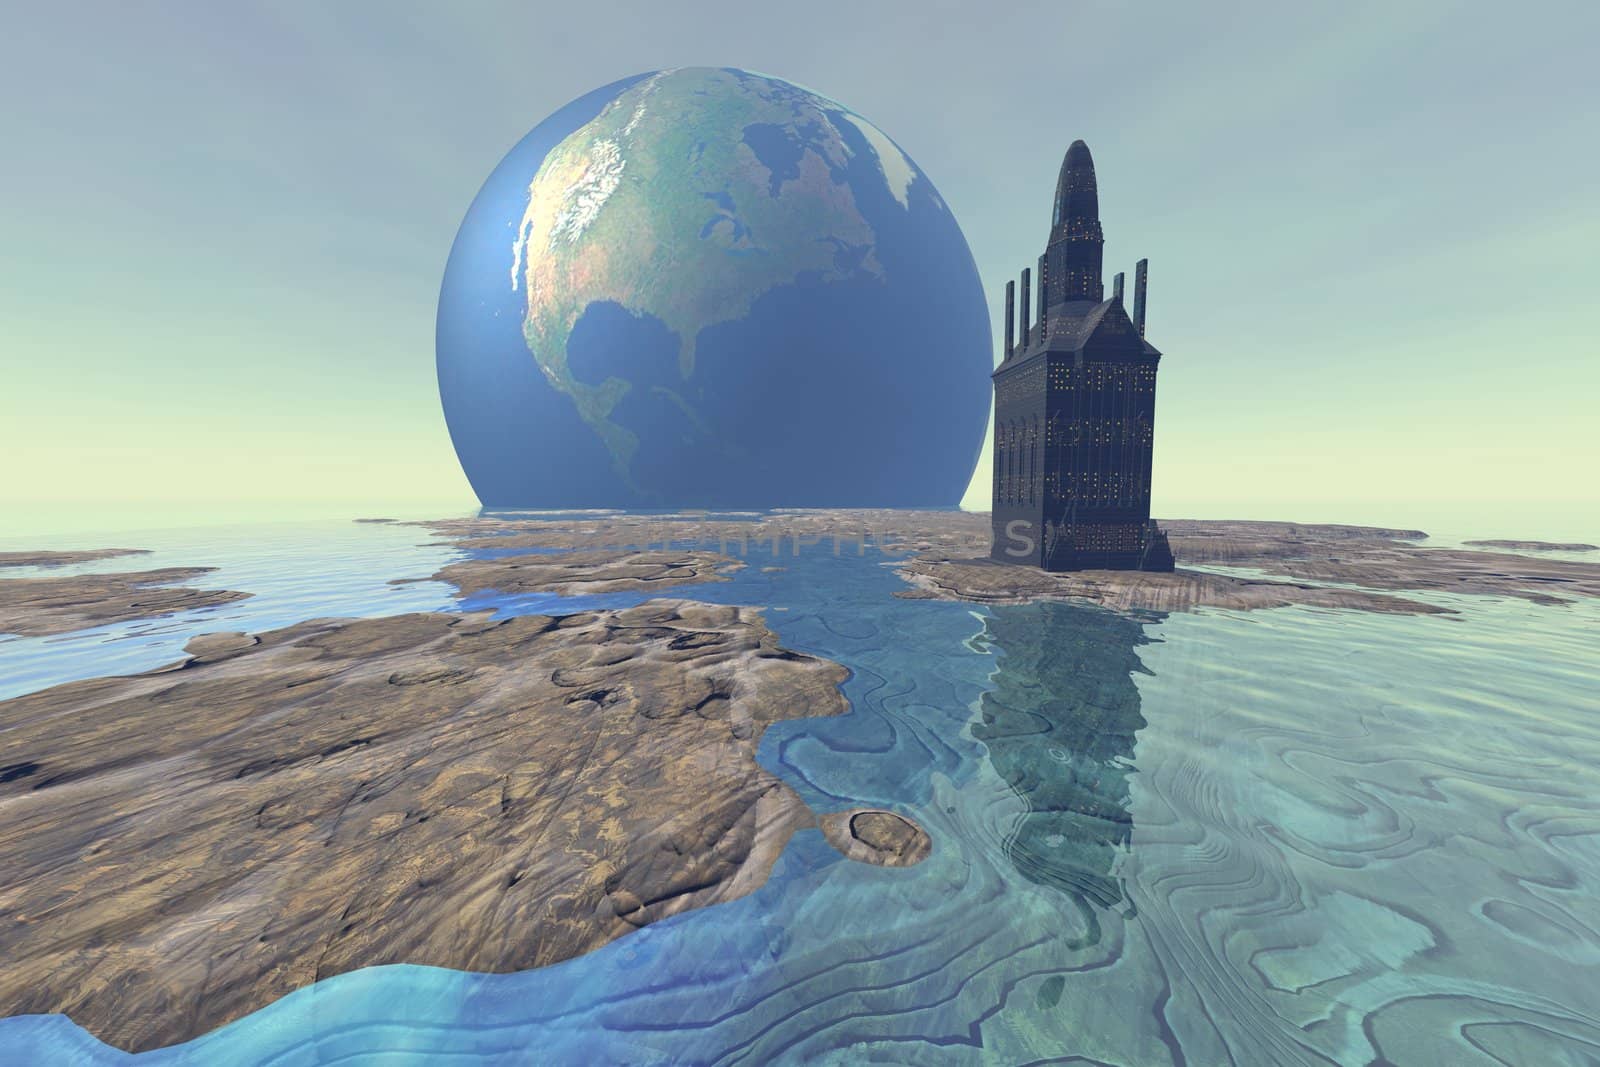 Terraforming the moon with water and buildings.